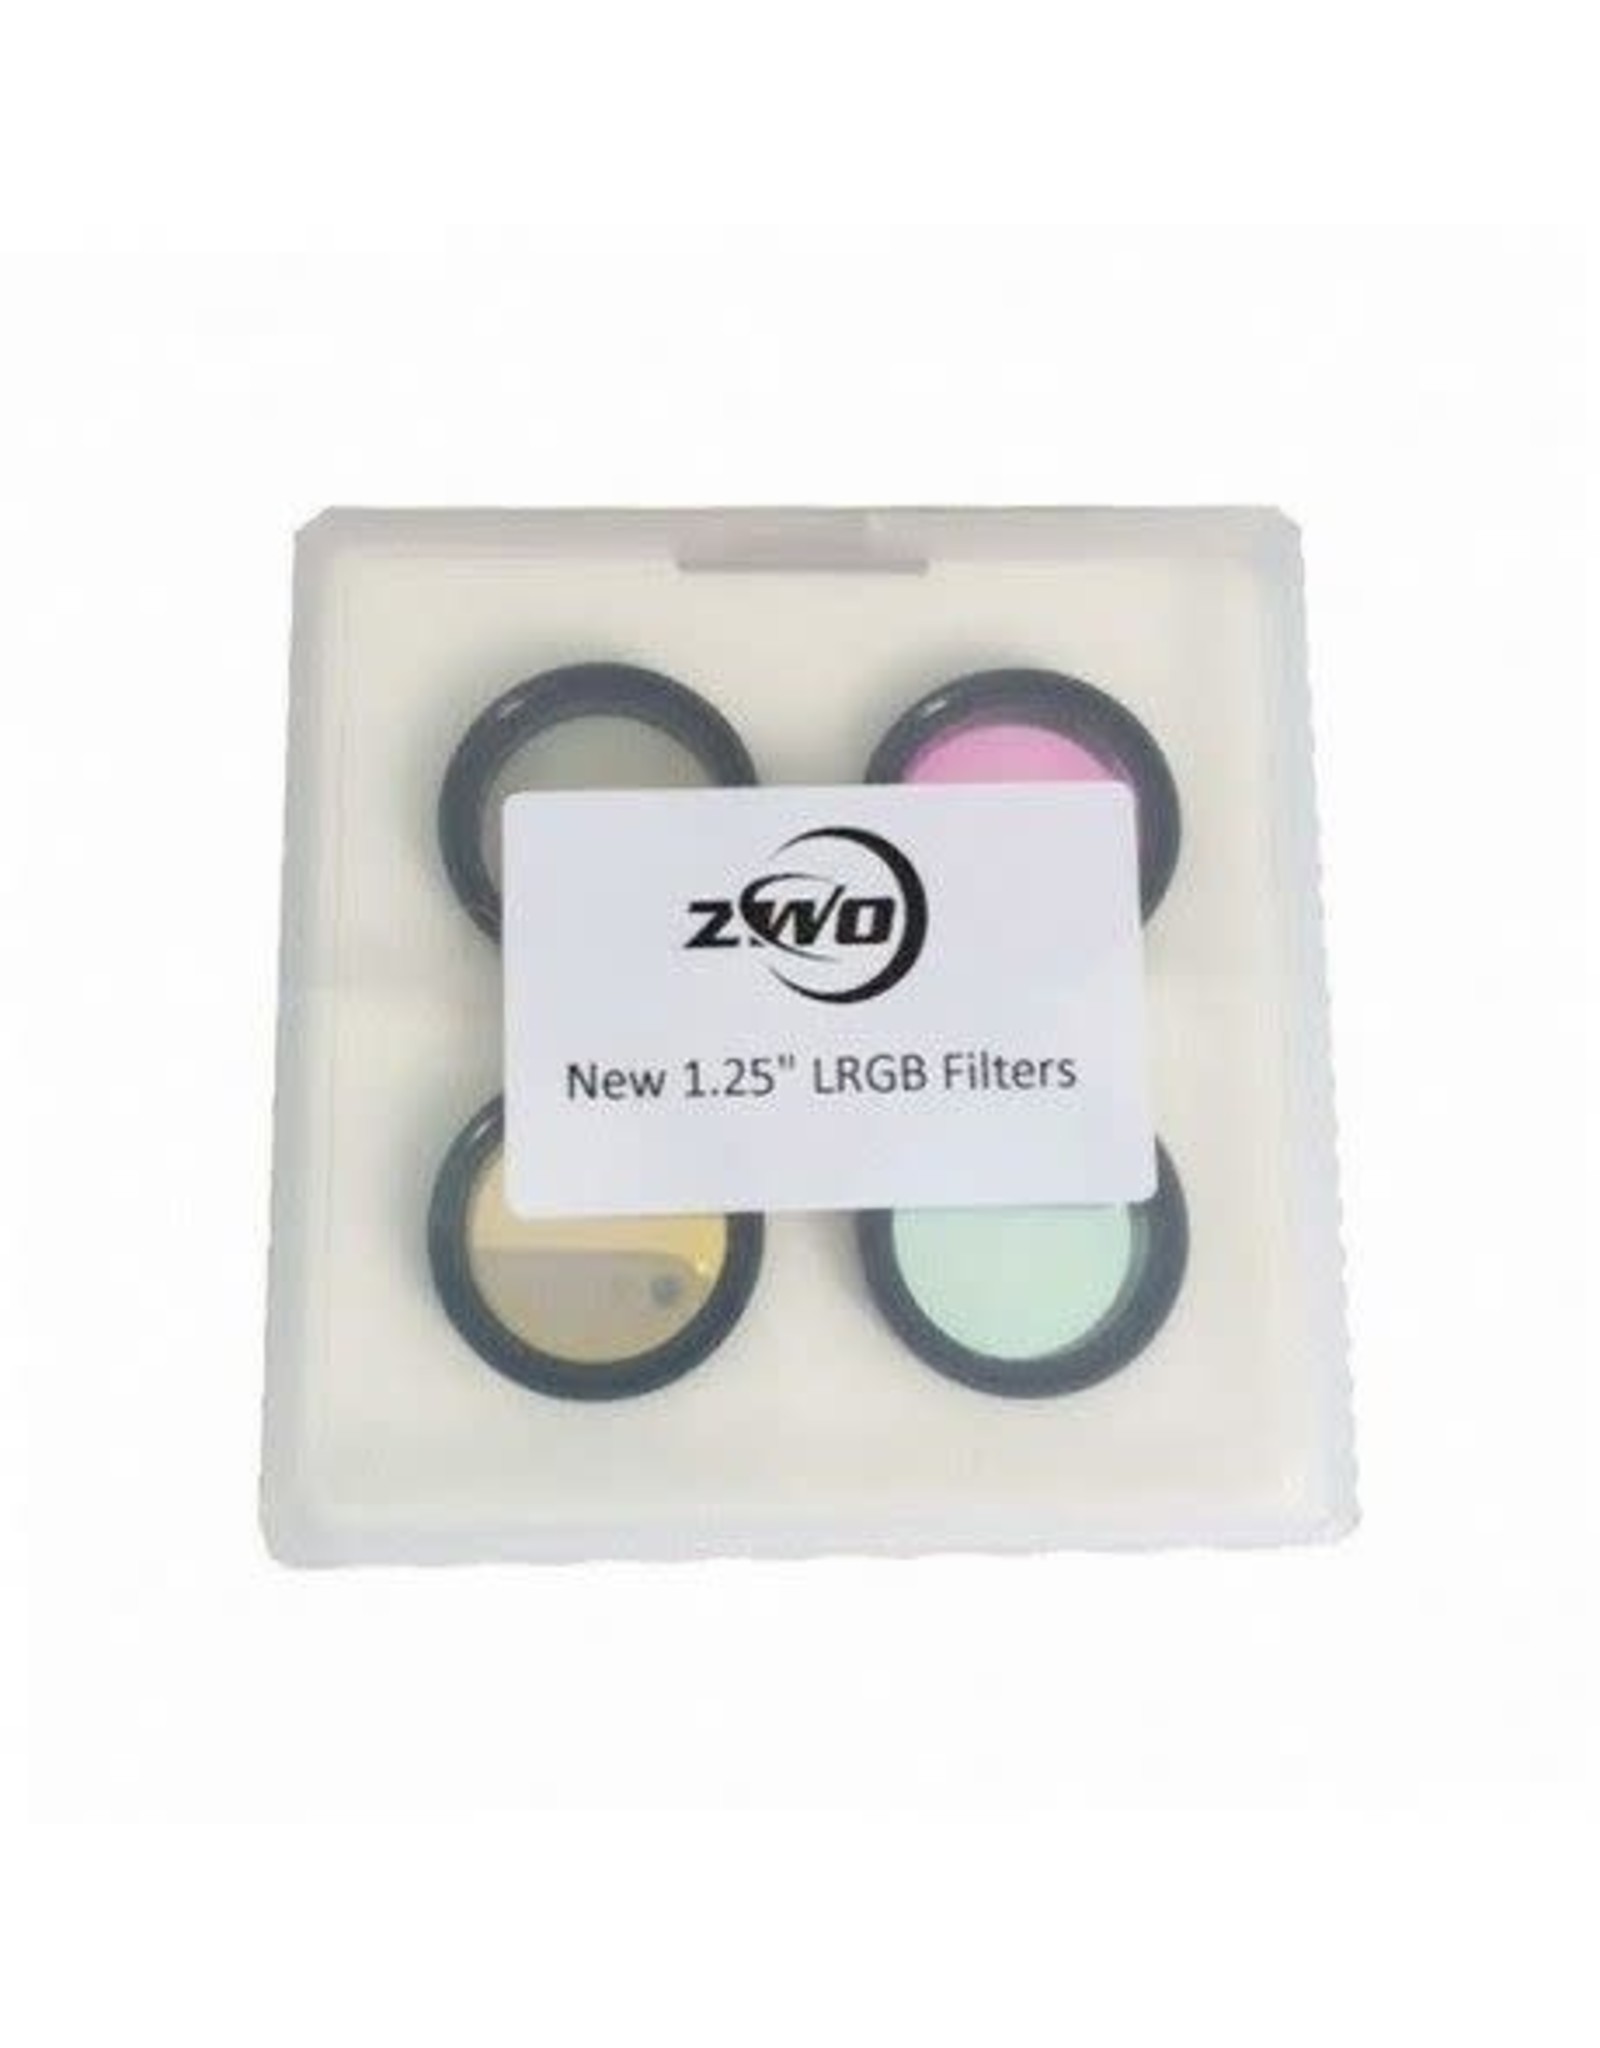 ZWO ZWO New LRGB Premium Filters Optimized for the ASI1600